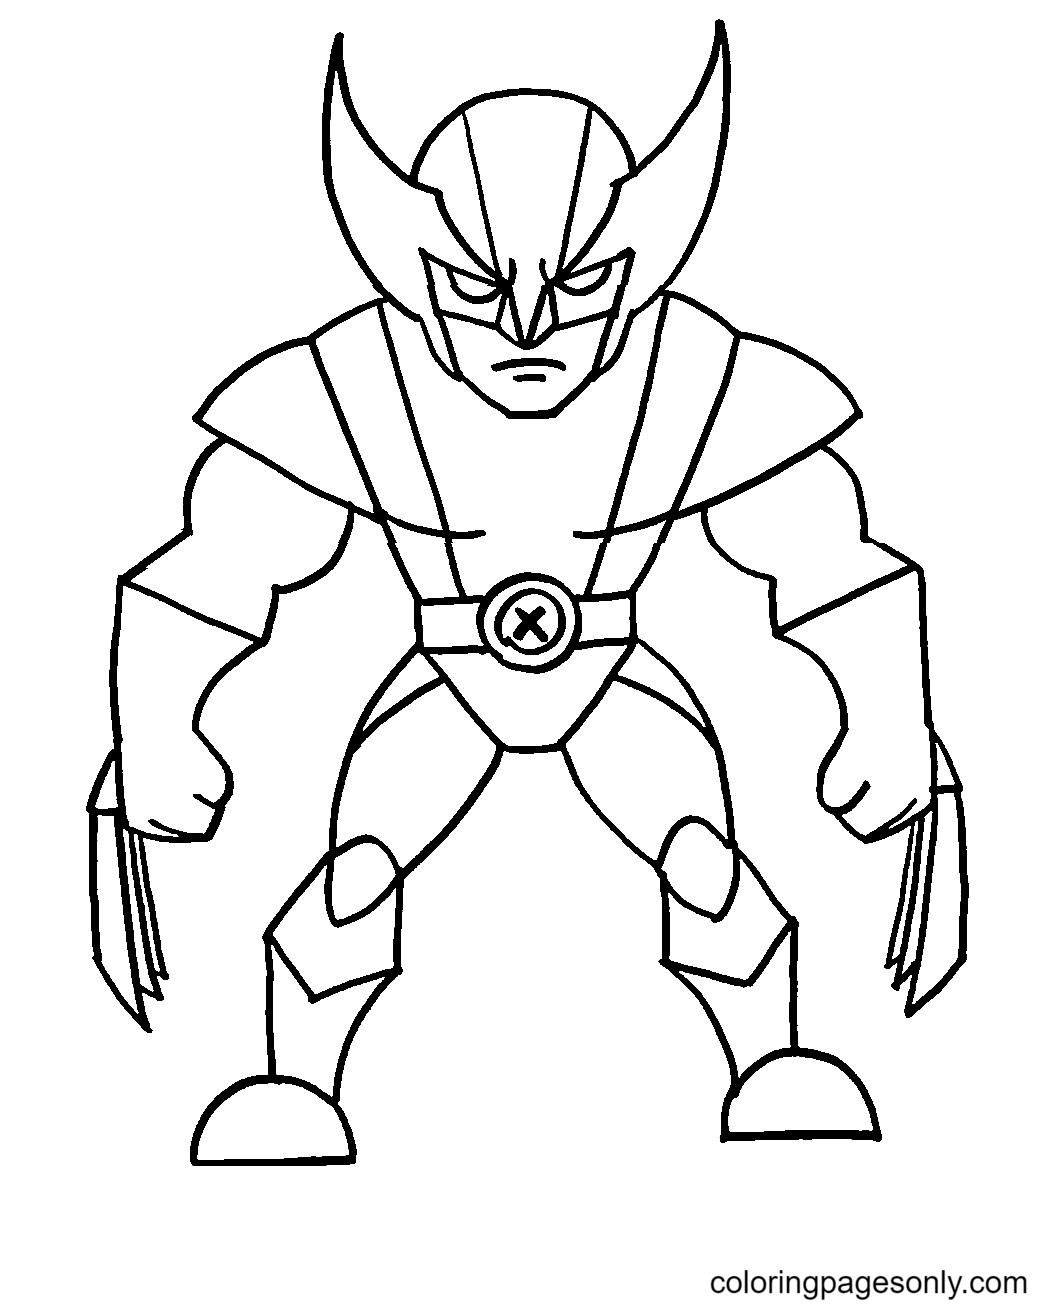 Wolverine in Fortnite Coloring Pages